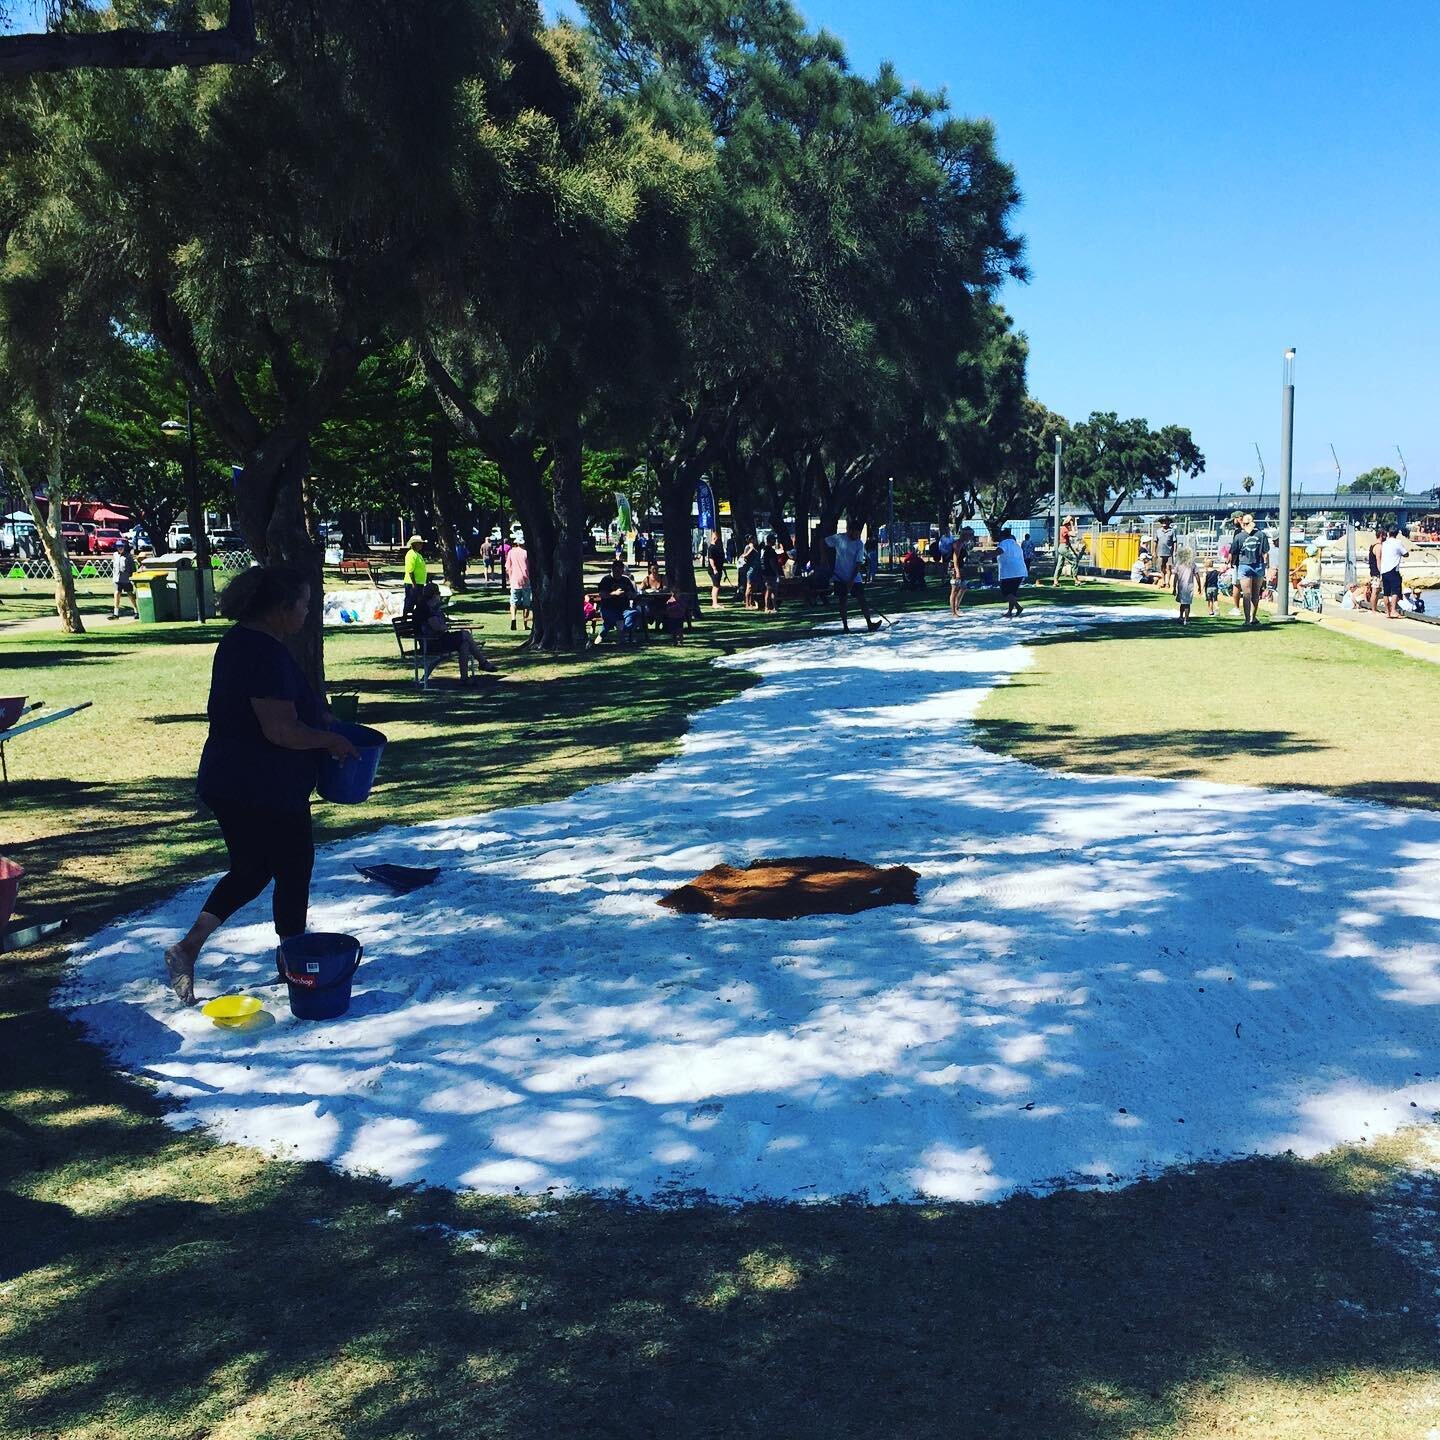 In need of drone aerial photos of Kerry Jetta-Stack &lsquo;s sand mandala- Journey lines symbolising Aboriginal footprints and our journey together . We are at Mandurah foreshore East - currently working together -wed be really grateful - will be loo